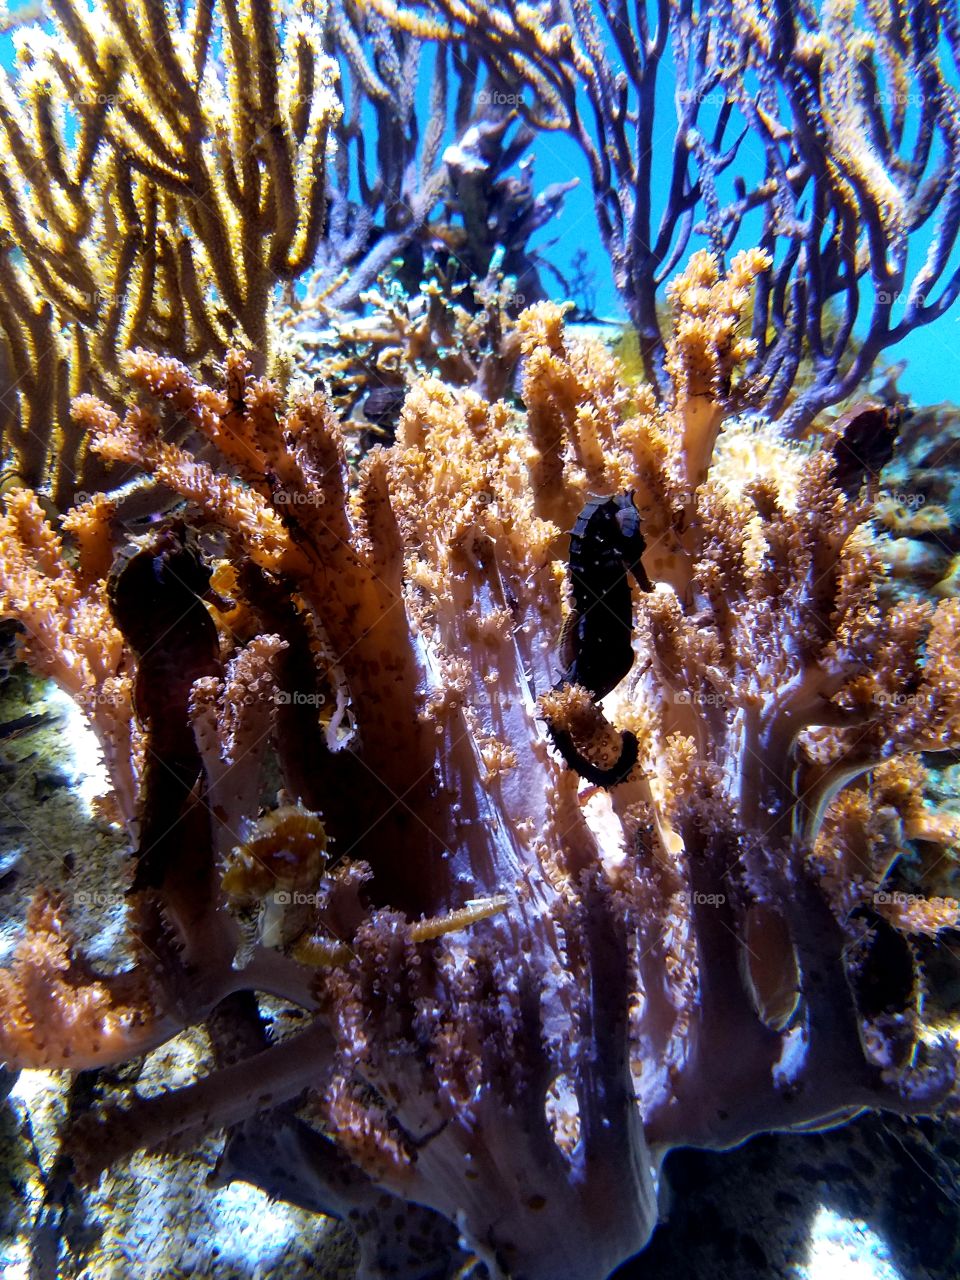 Seahorses in habitat of bright and colorful coral.